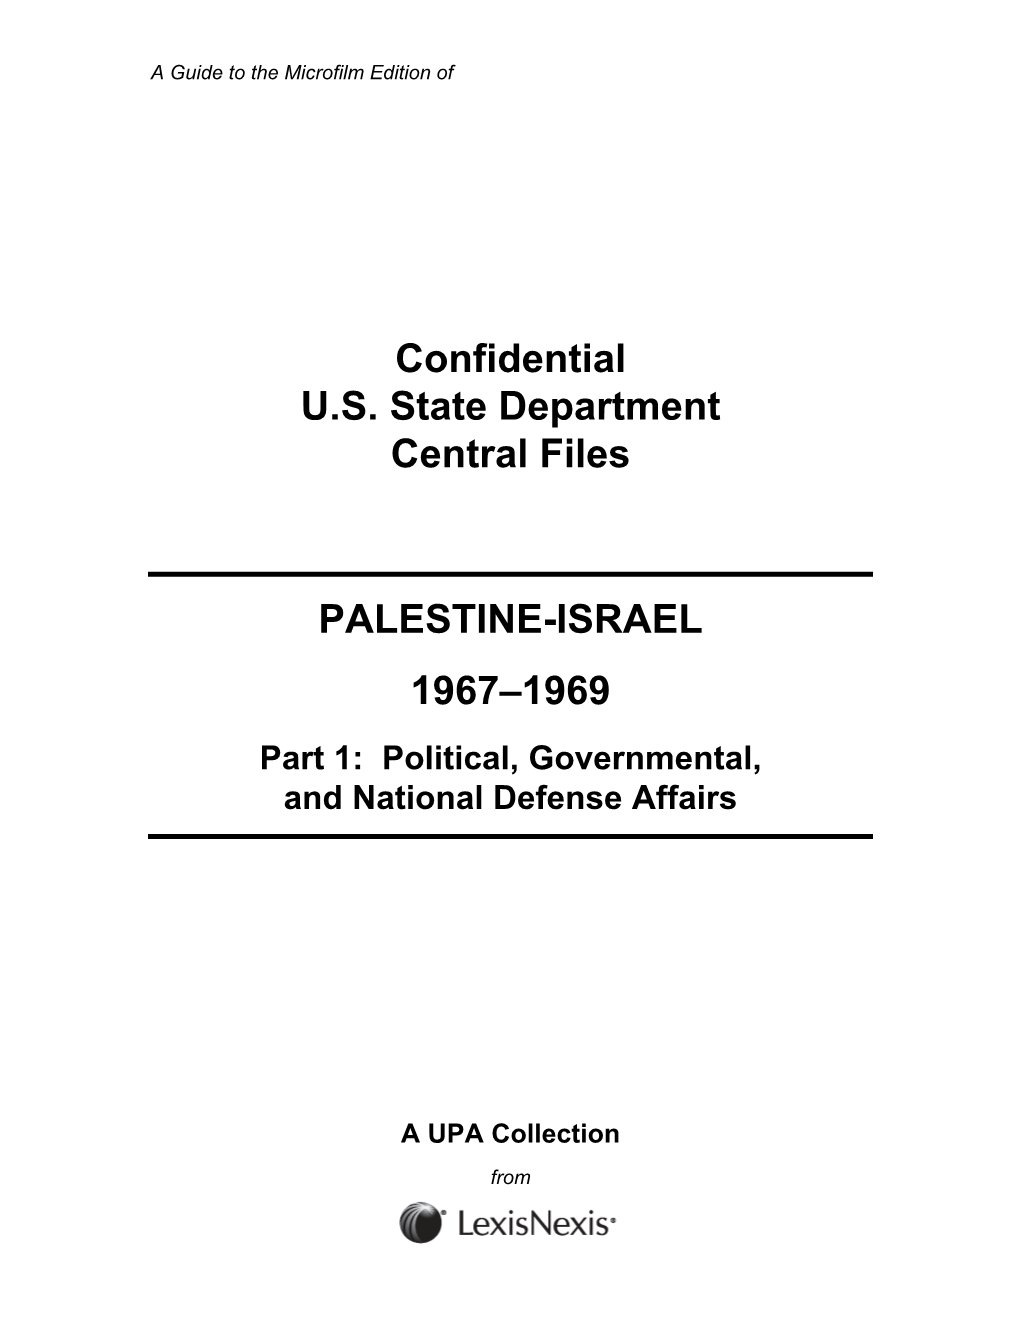 Confidential U.S. State Department Central Files PALESTINE-ISRAEL